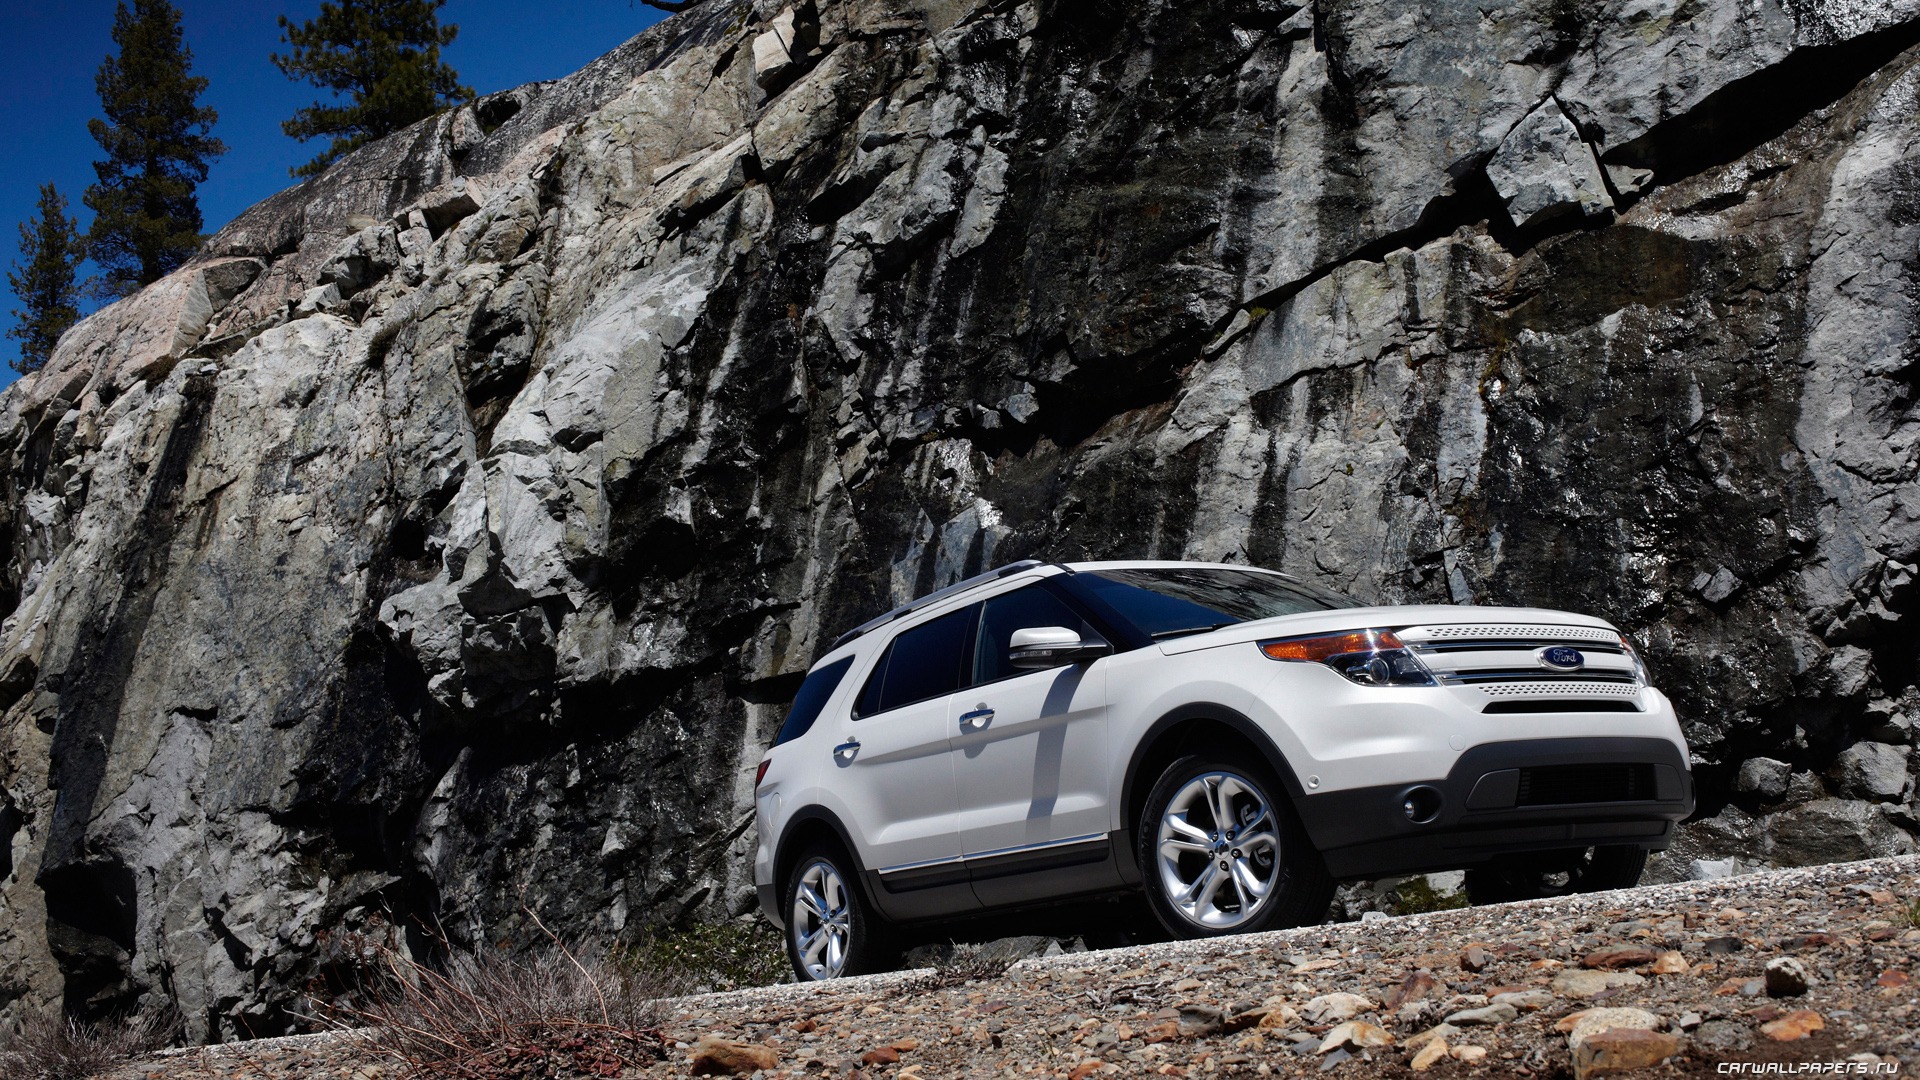 Ford Explorer Limited - 2011 福特 #12 - 1920x1080